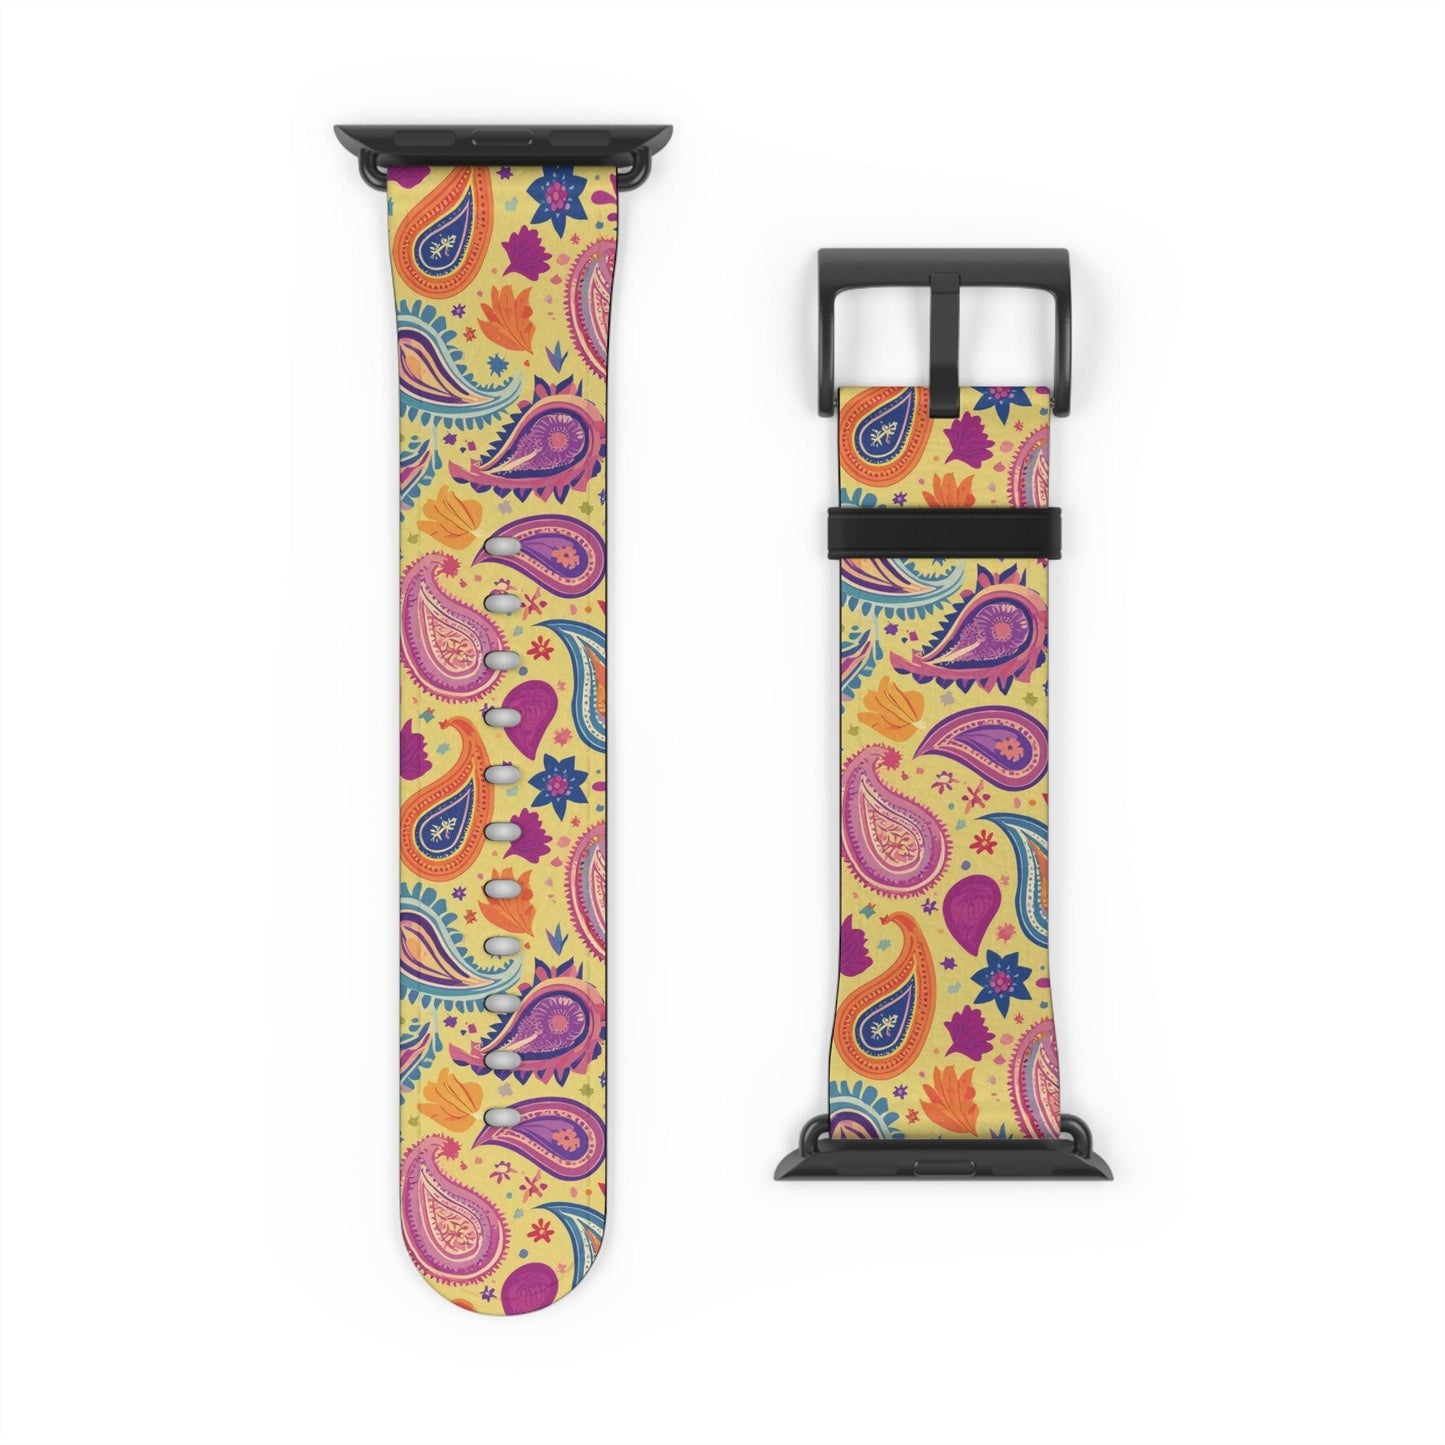 Indian Whimsical Paisley Watch Band - The Global Wanderer